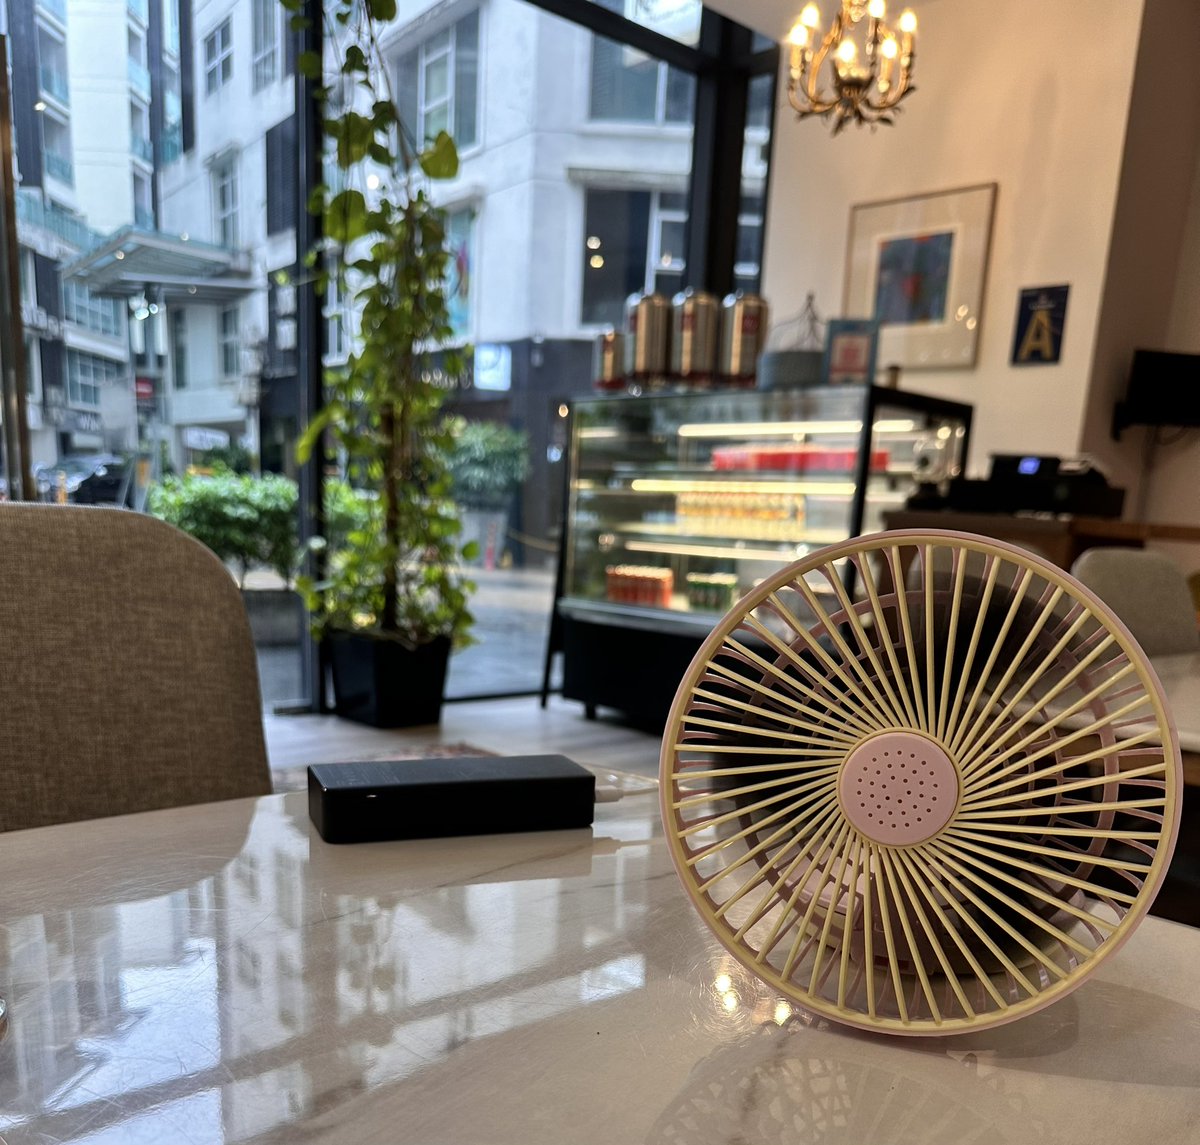 Editing my WIP at this tiny cafe and very pleased to be their only customer. When I politely enquired if the air-conditioner was working, the wait staff got me my own tiny fan. (This is a sign, right? Because these edits are killing me.) #writinglife #WritingCommunity